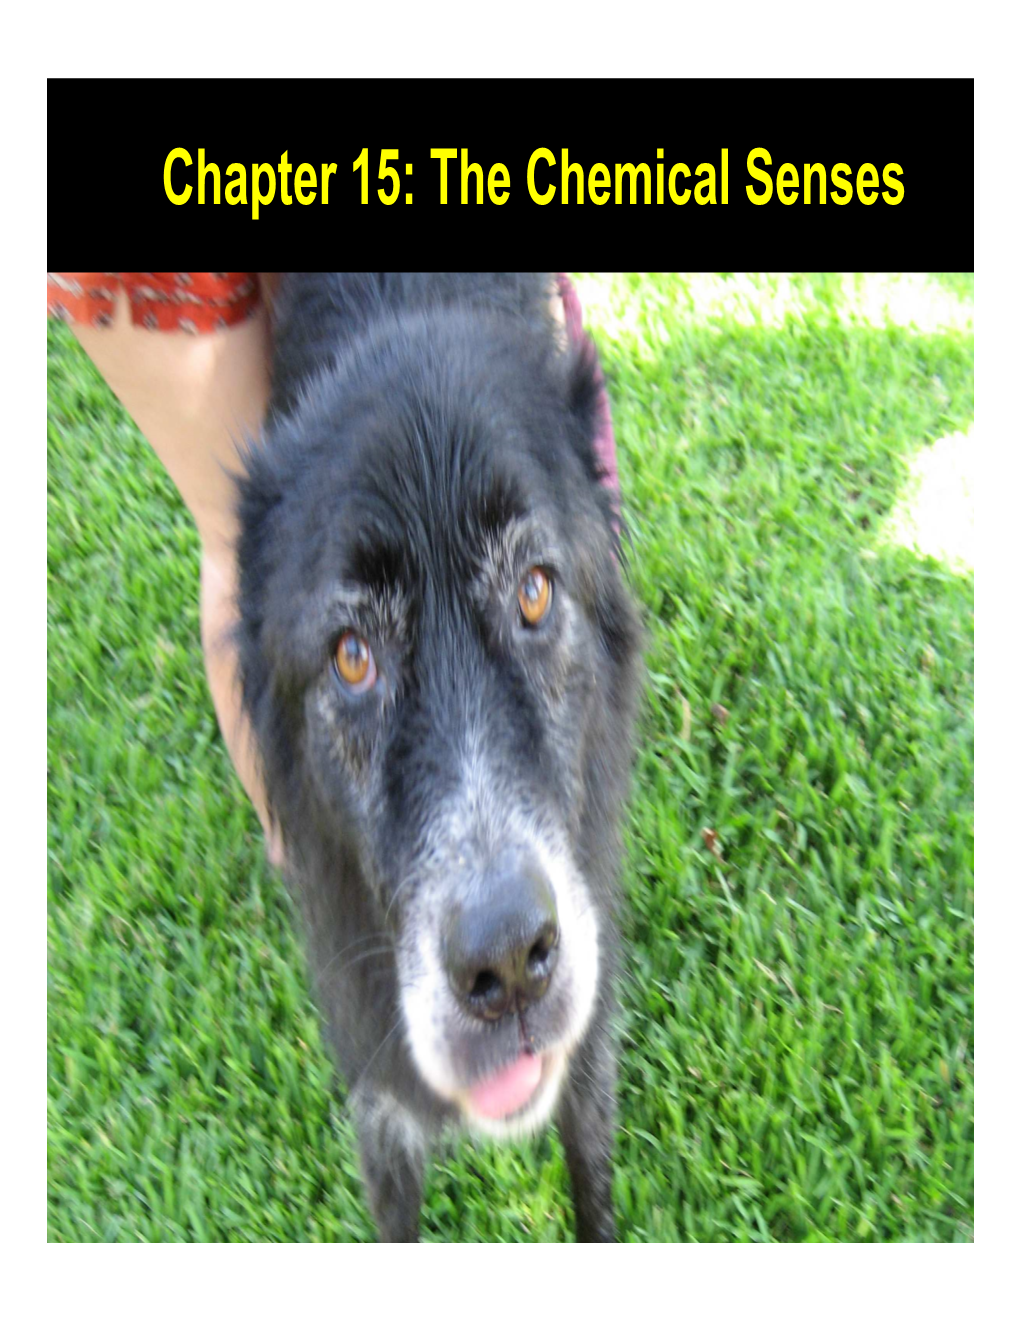 Chapter 15: the Chemical Senses